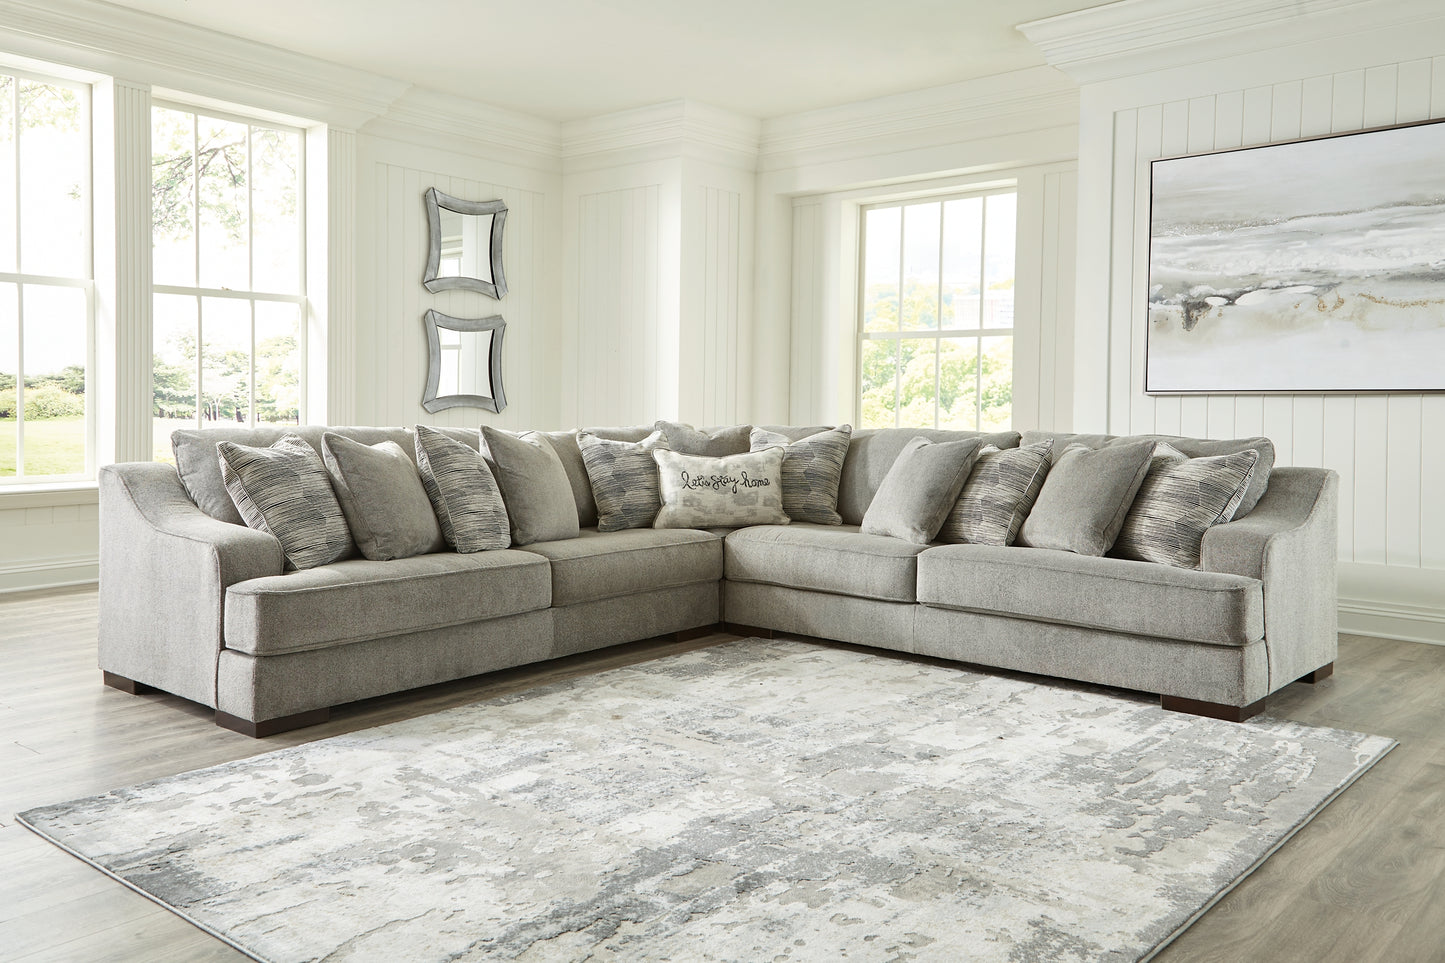 Bayless 3-Piece Sectional with Ottoman